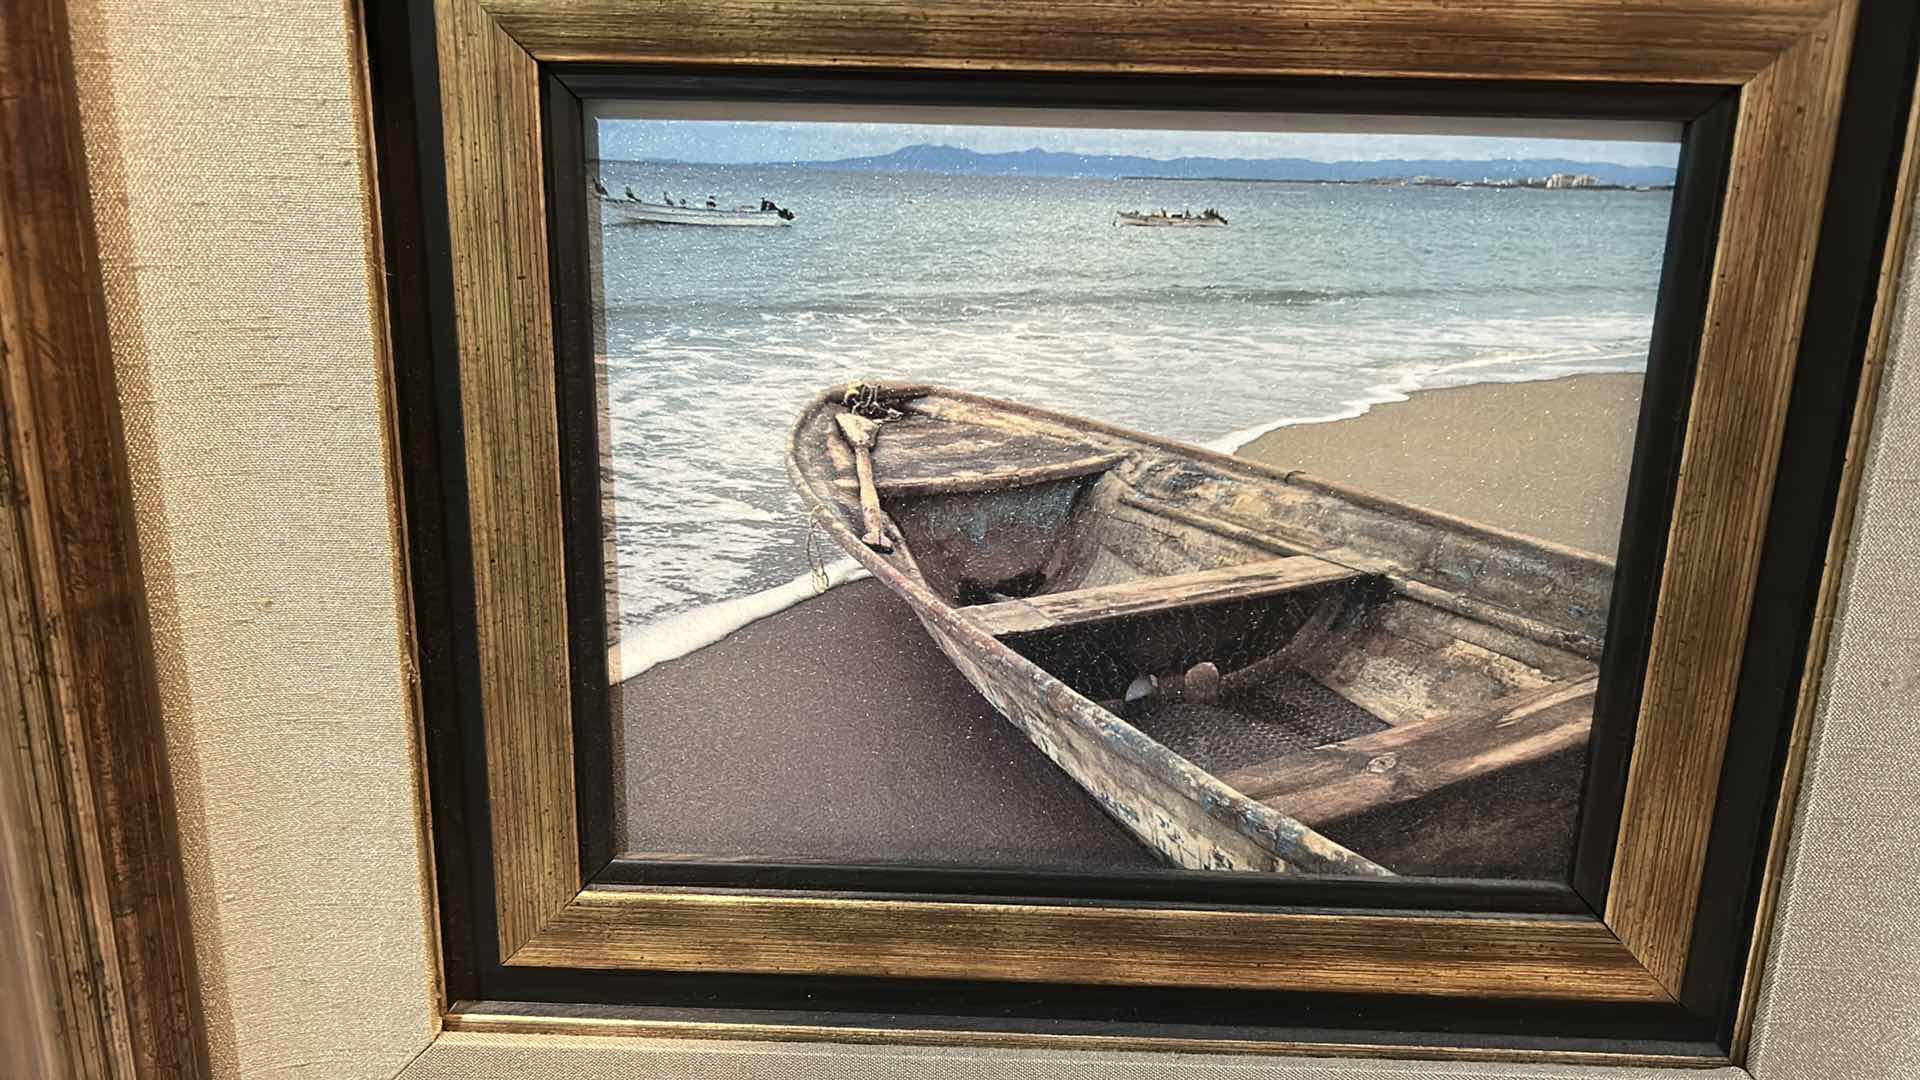 Photo 3 of WALL DECOR  -" BEACHED BOAT" ON SHORE ARTWORK IN WOOD FRAME 24” x 22”